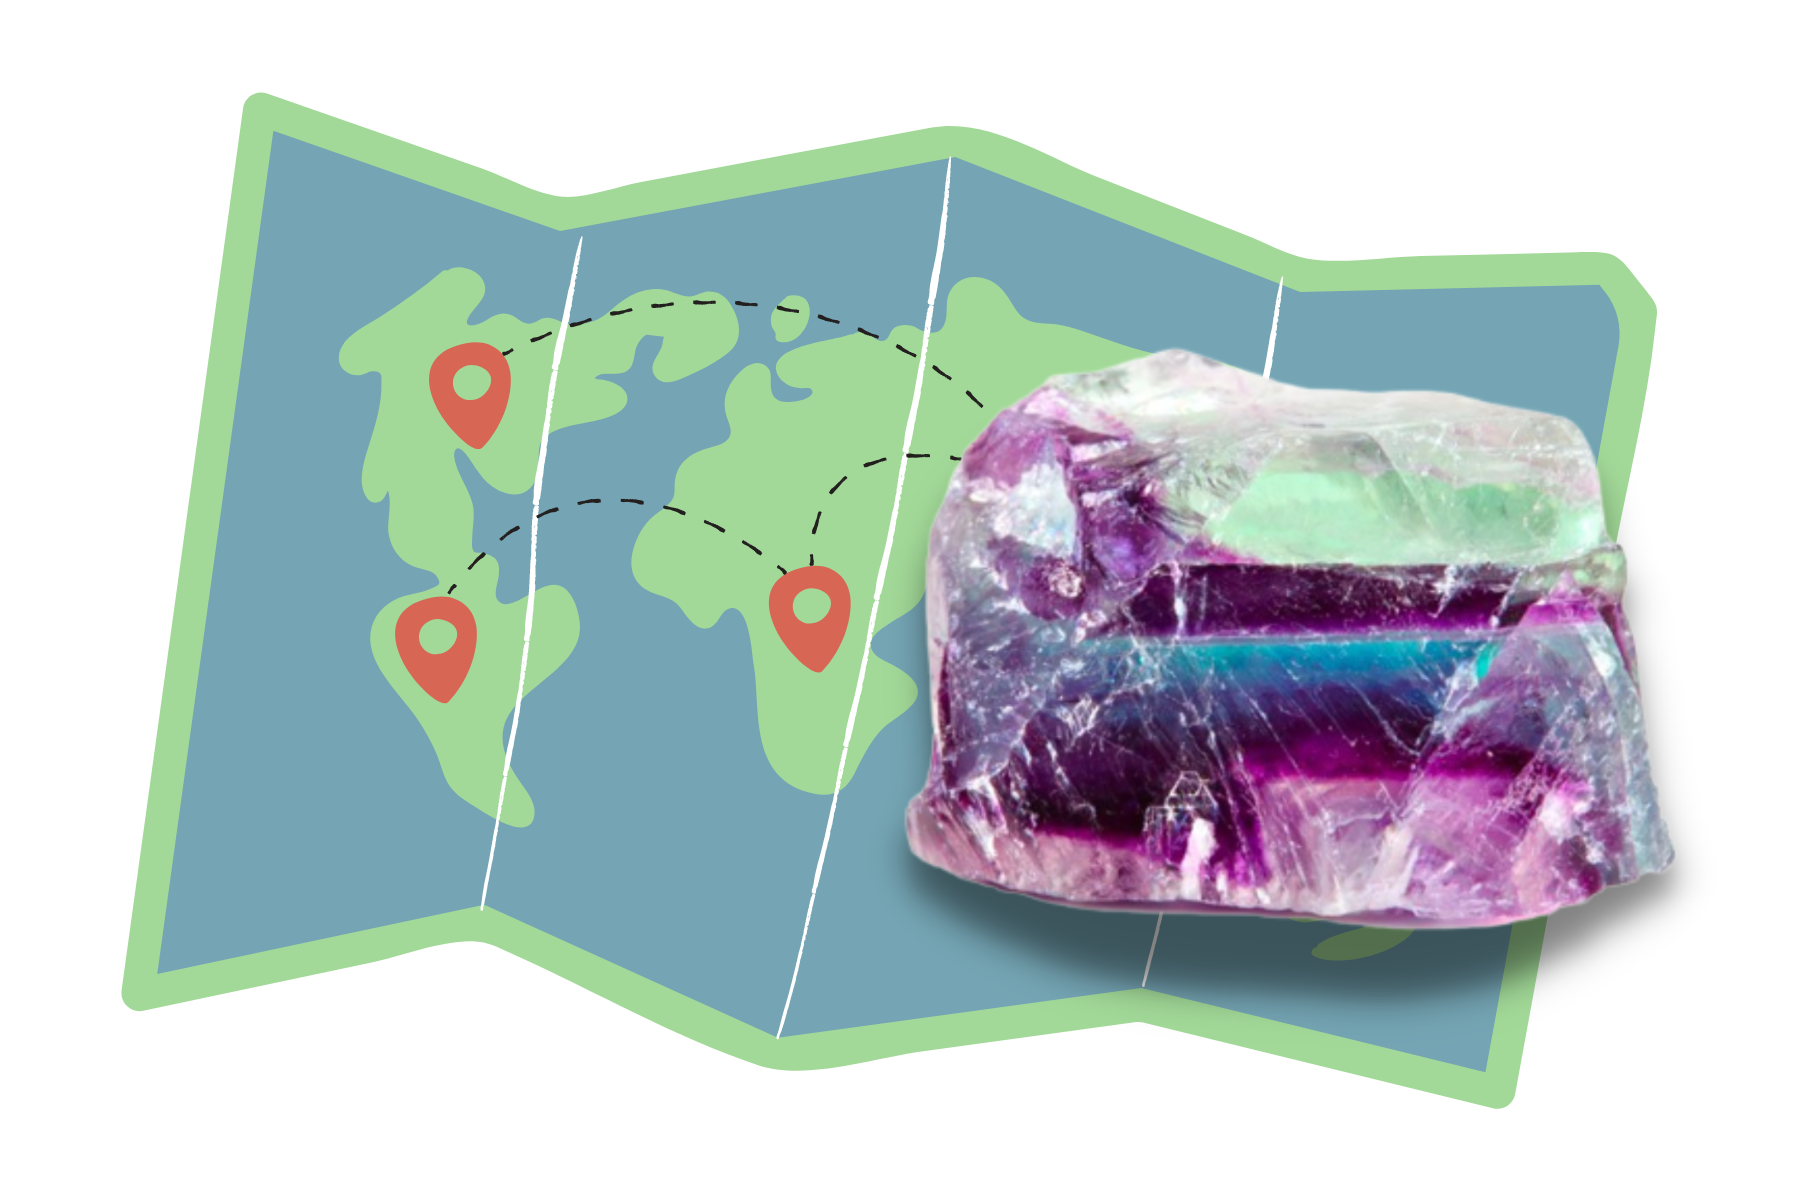 The fluorite is at the top of the travel map